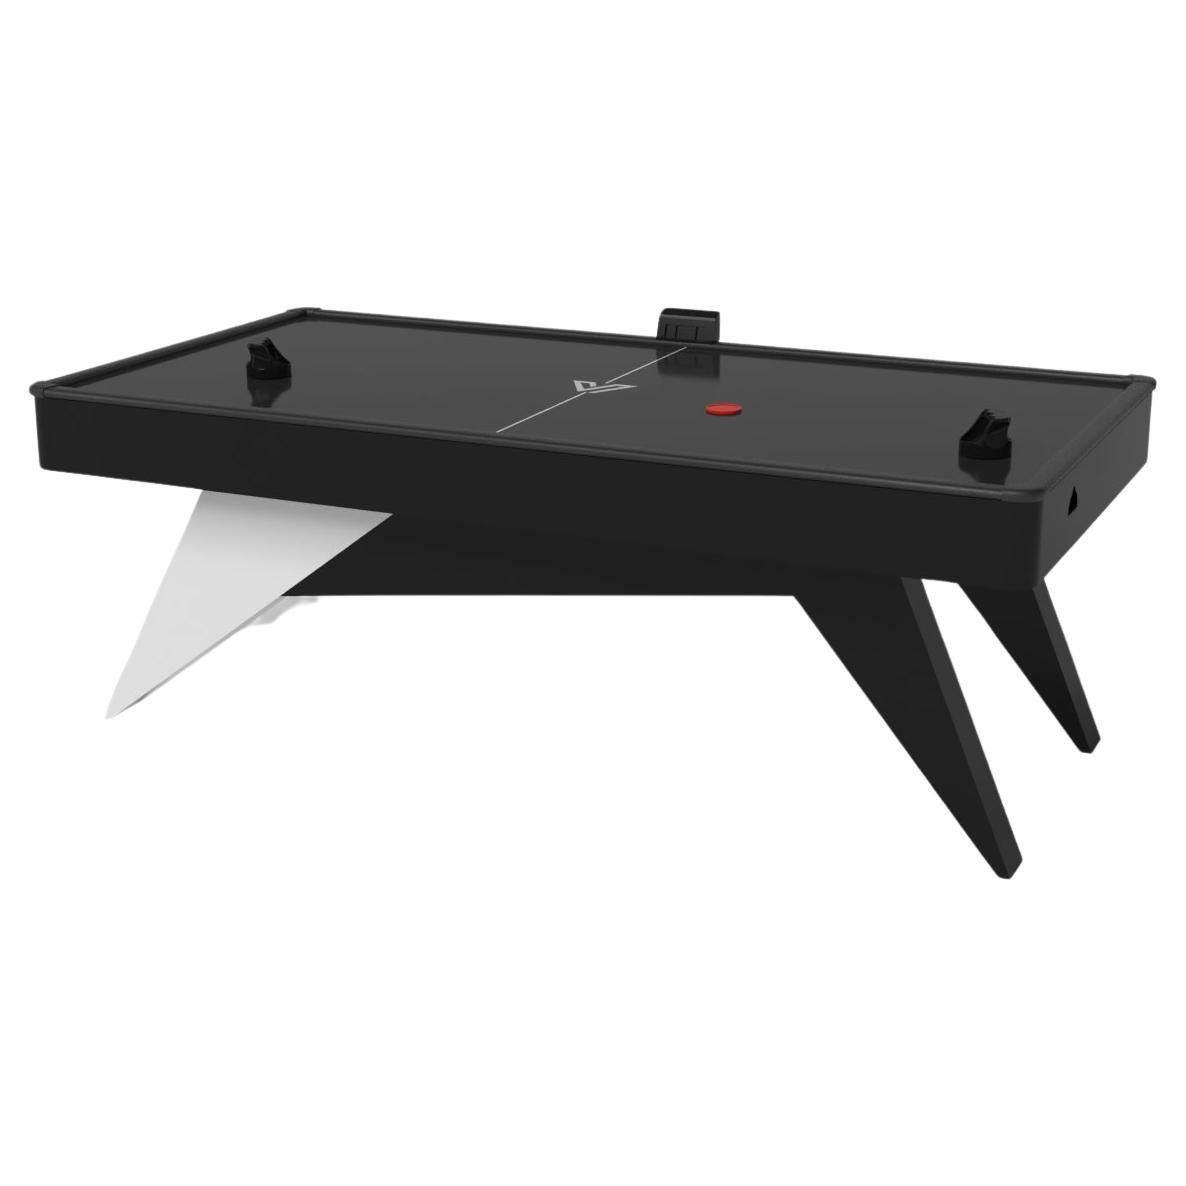 Tables de hockey d'aviation Mantis Elevate Customs /Solid Pantone Black in 7' -Made in USA